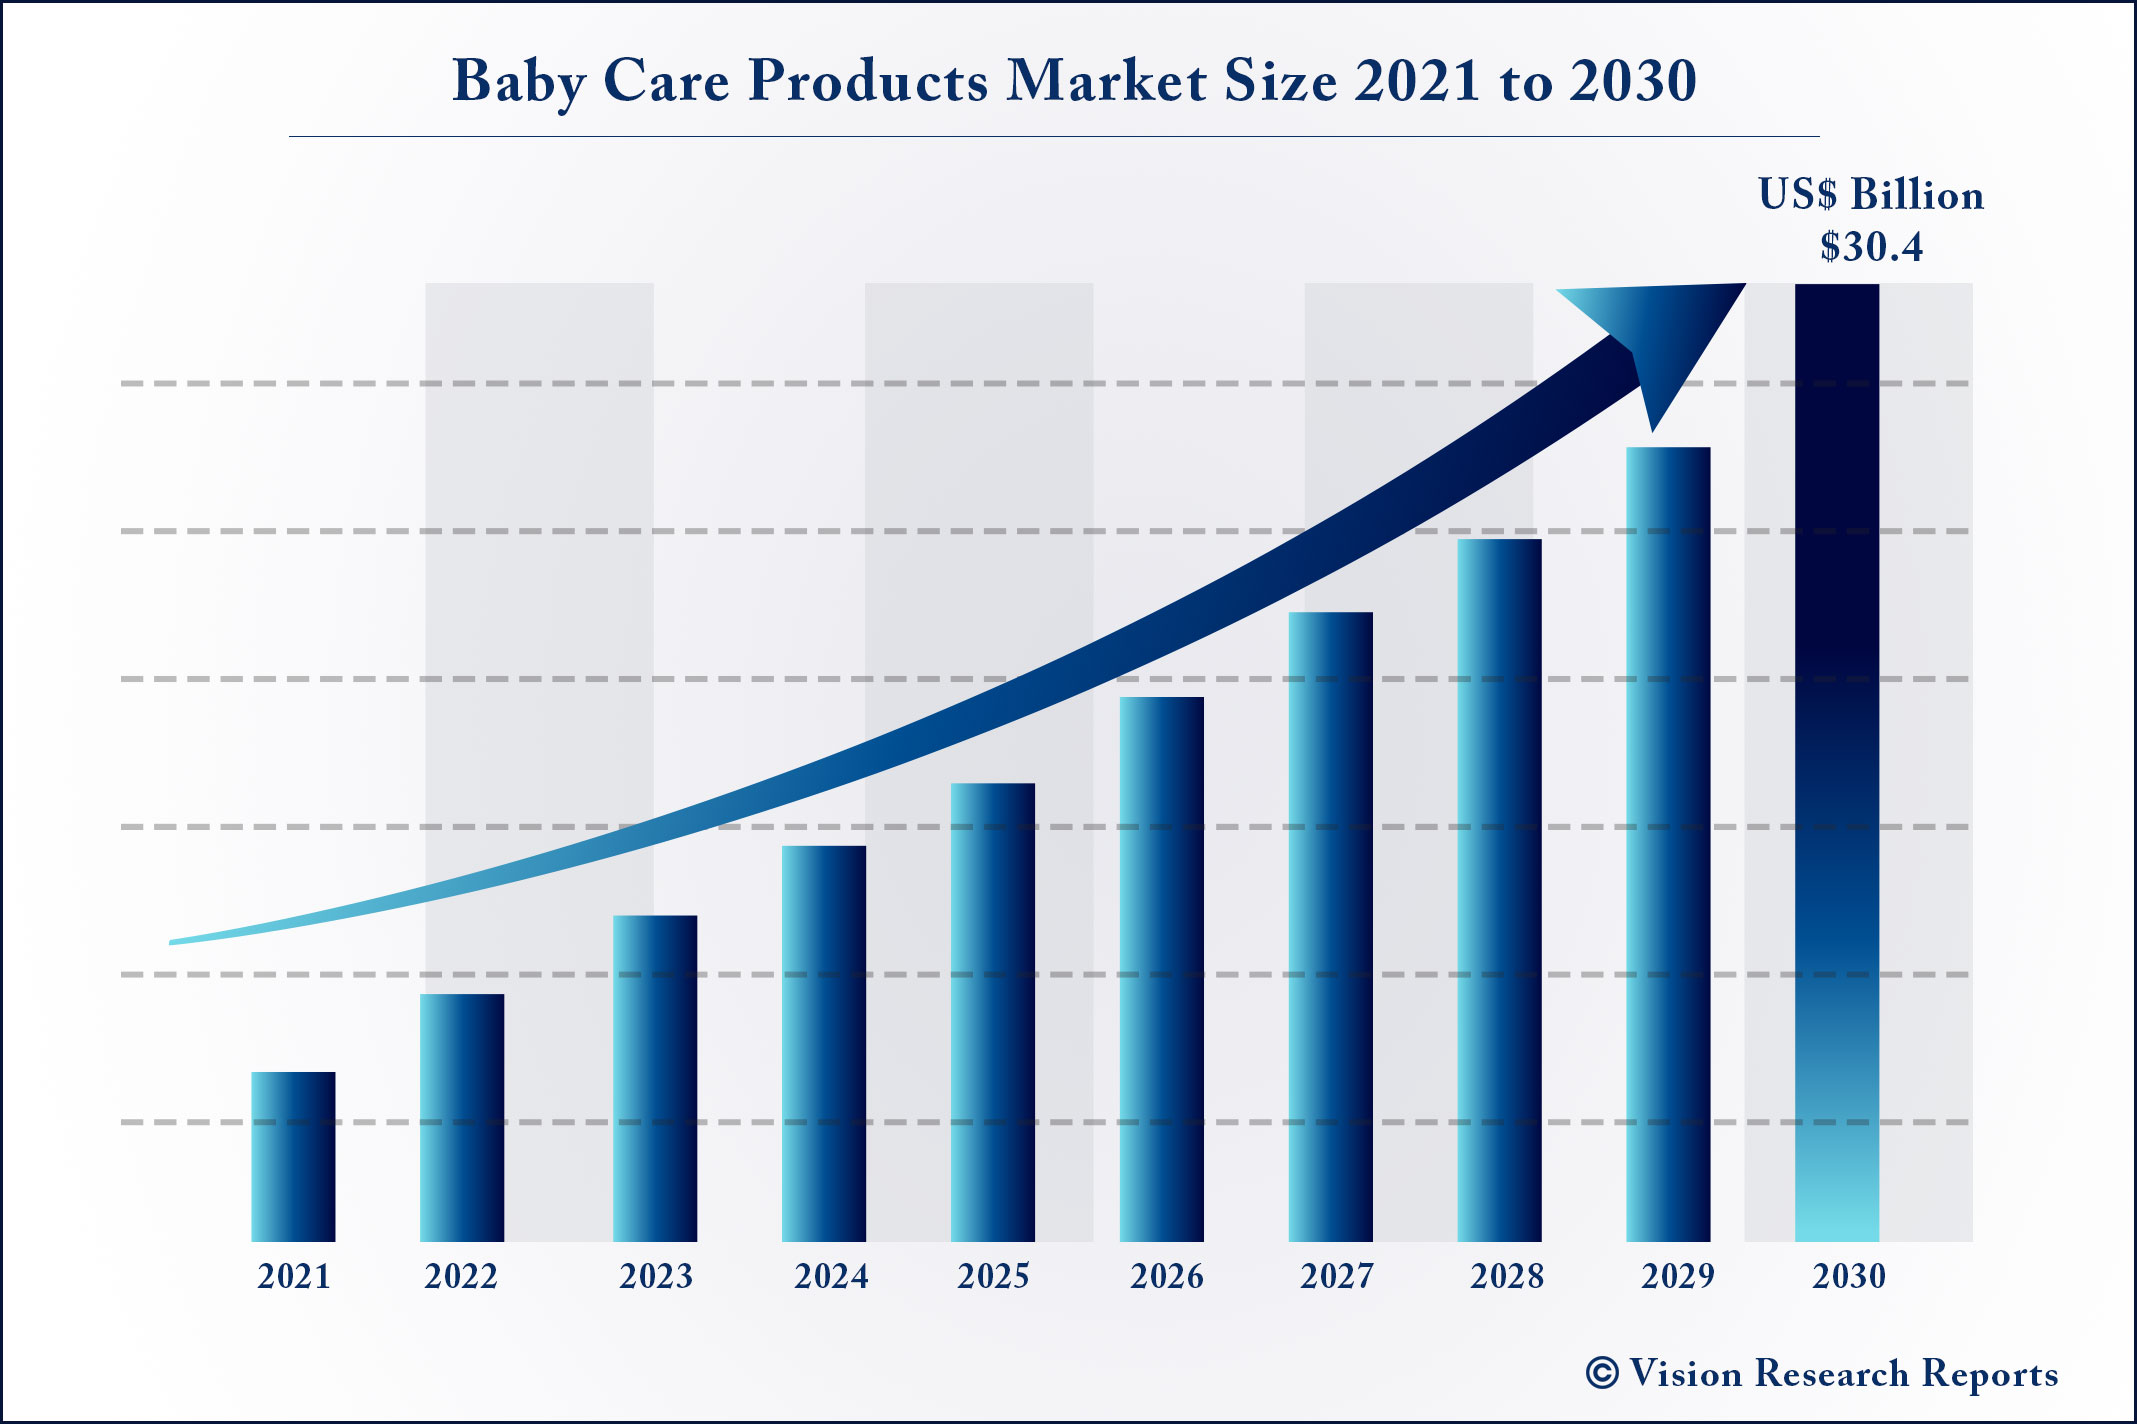 Baby Care Products Market Size 2021 to 2030